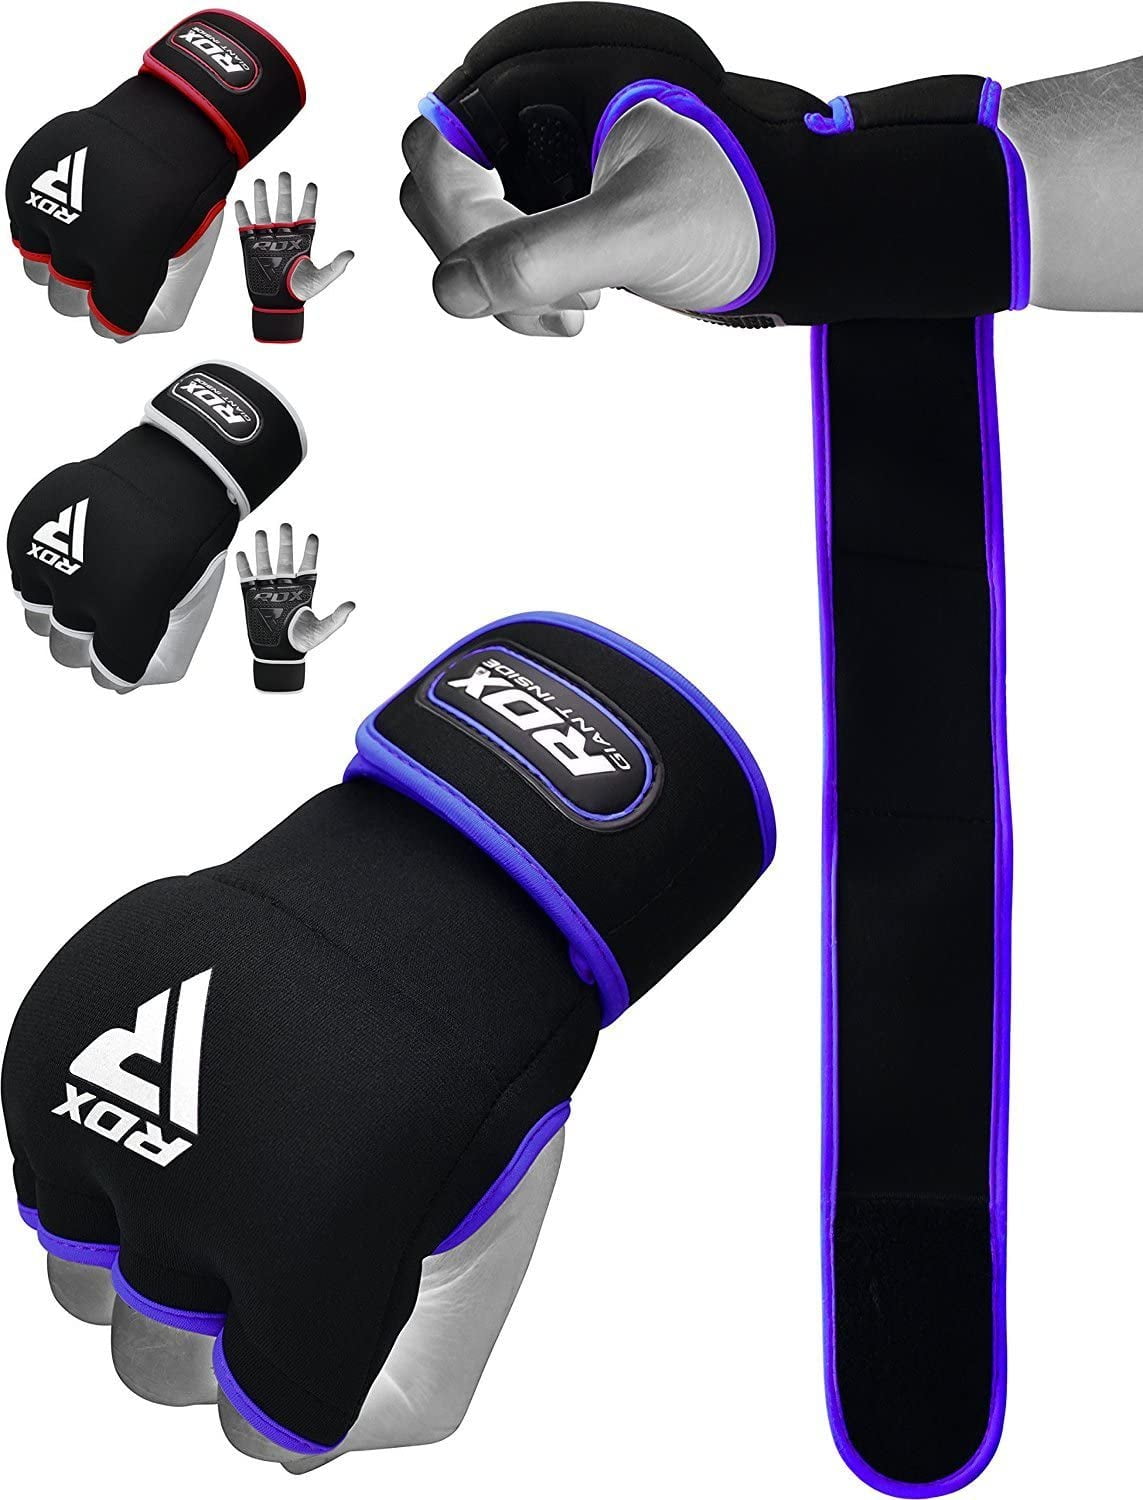 Quick Long Wrist Support Kickboxing Training RDX Ladies Boxing Hand Wraps Inner Gloves for Punching Women Elasticated Padded Bandages under Mitts Muay Thai Great for MMA Fist Protector 